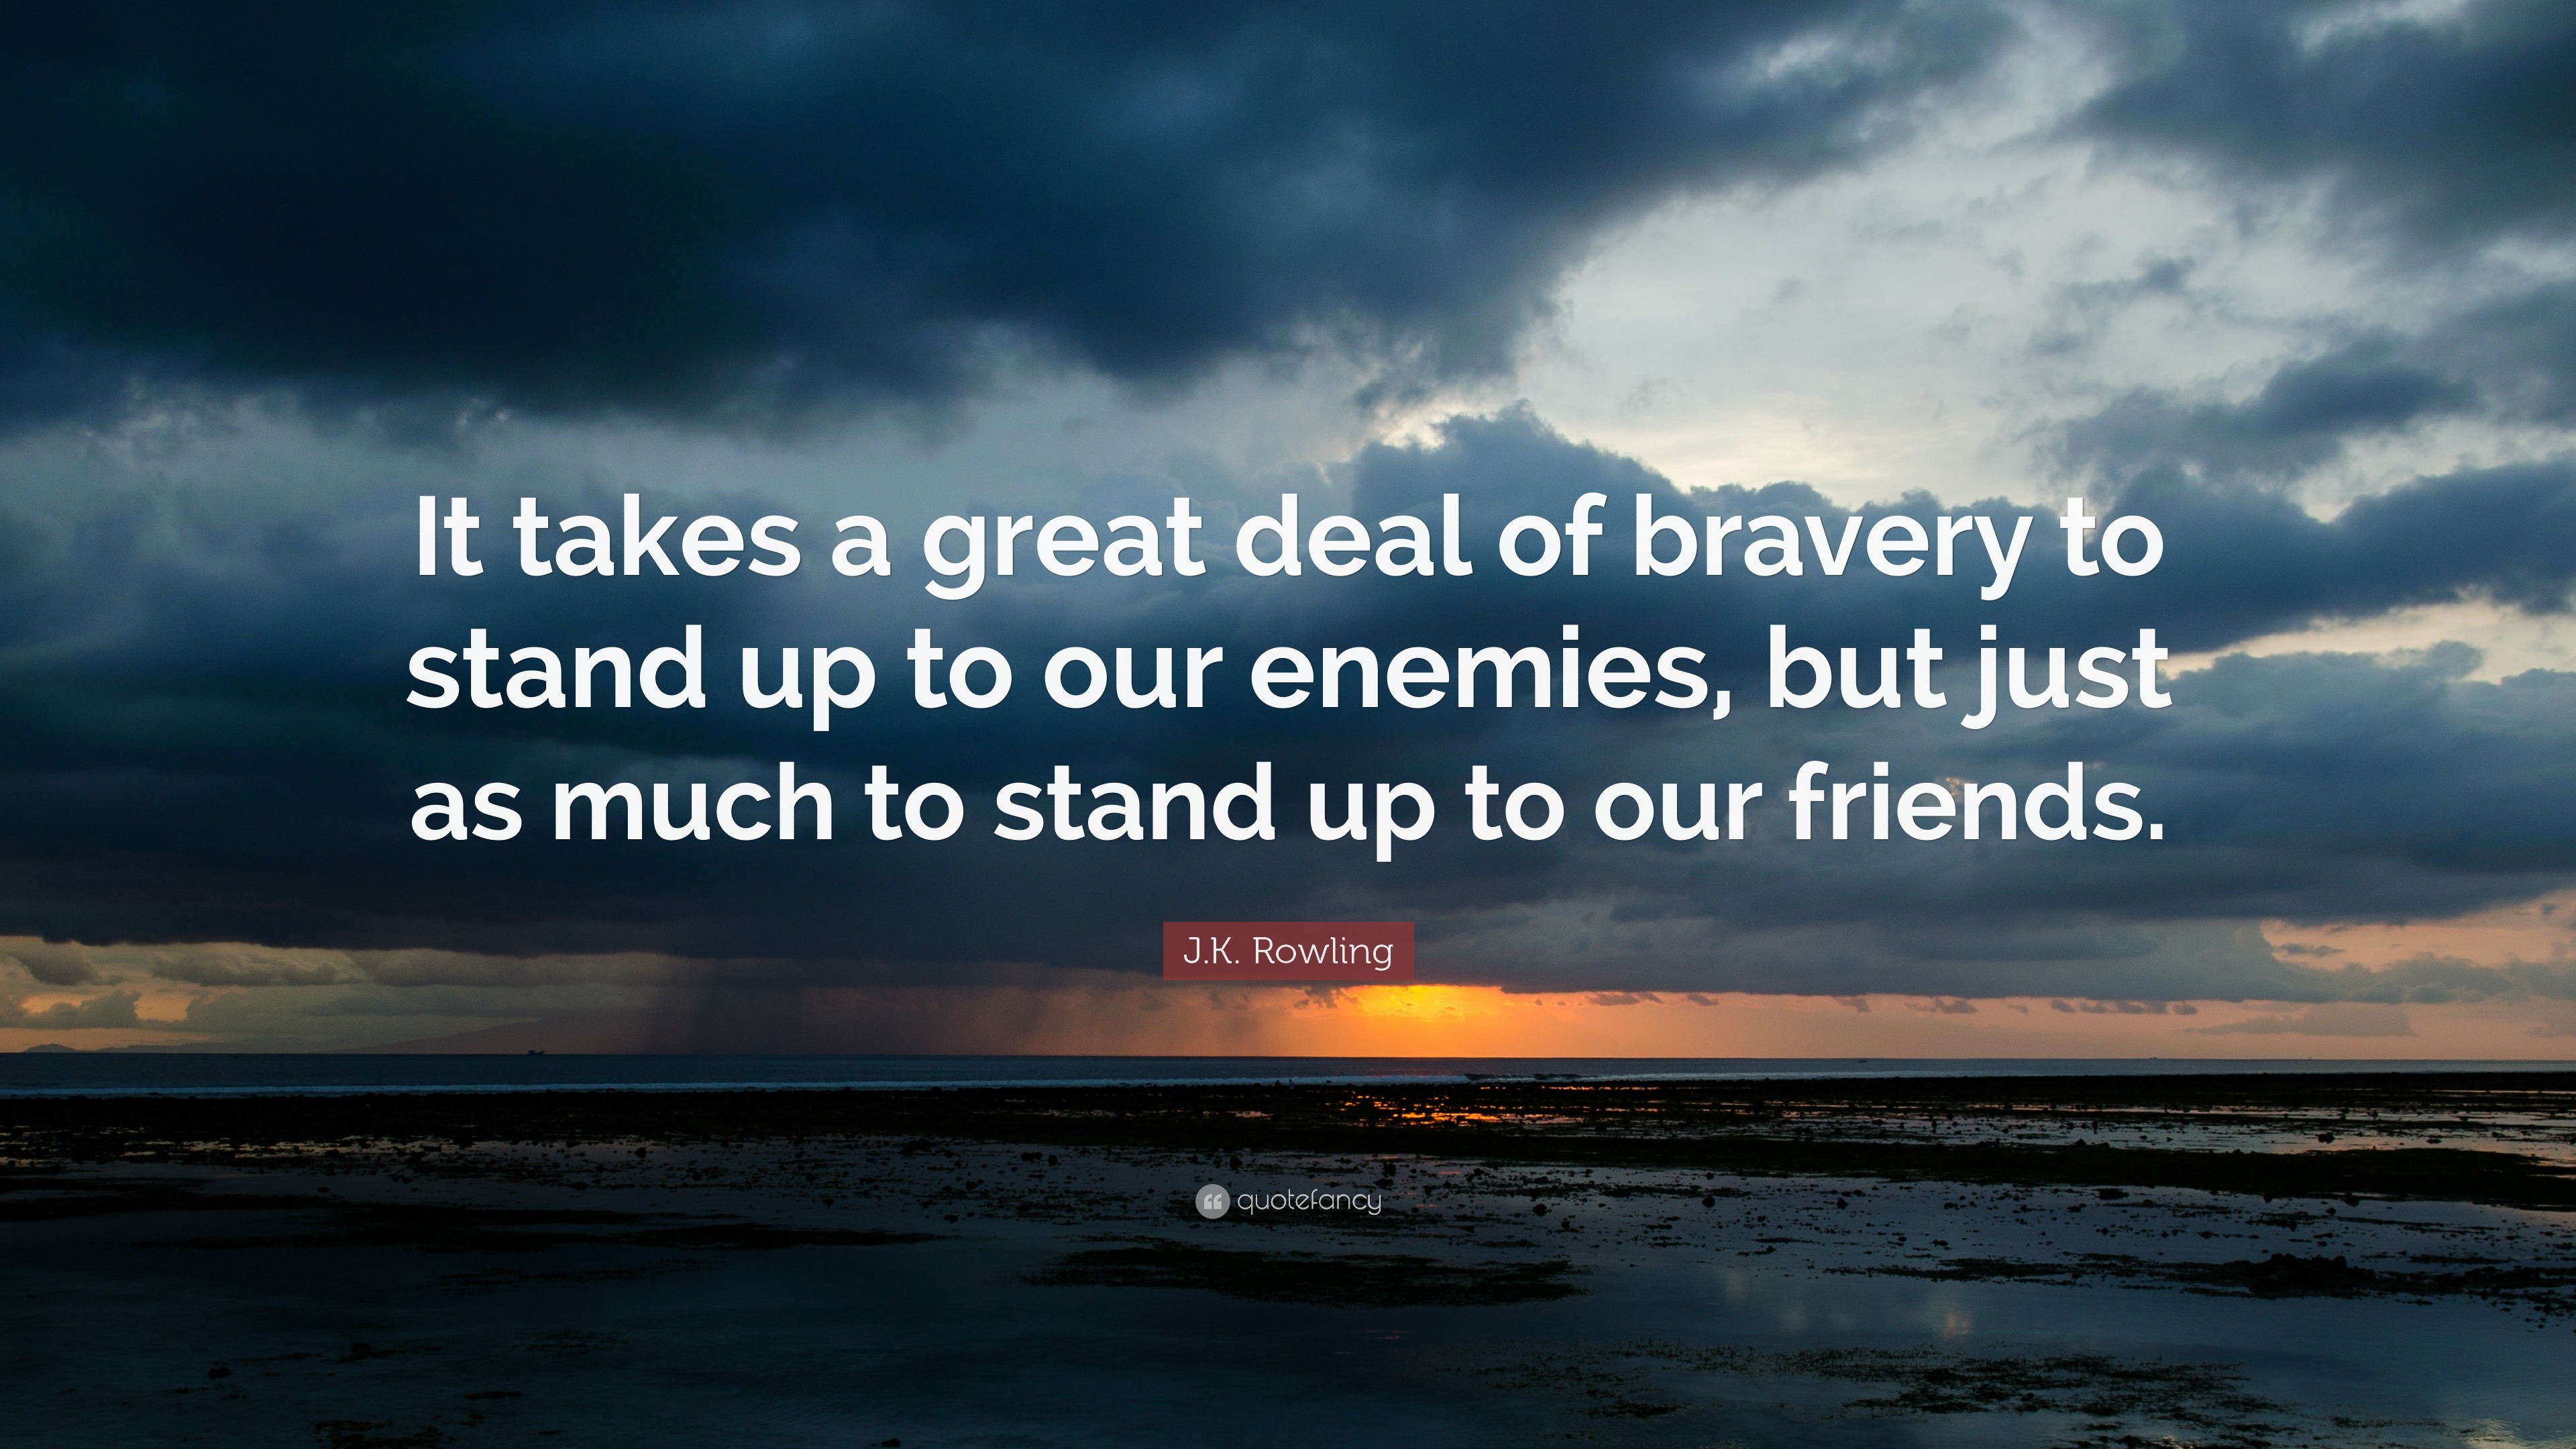 J.K. Rowling Quote: “It takes a great deal of bravery to stand up to ...